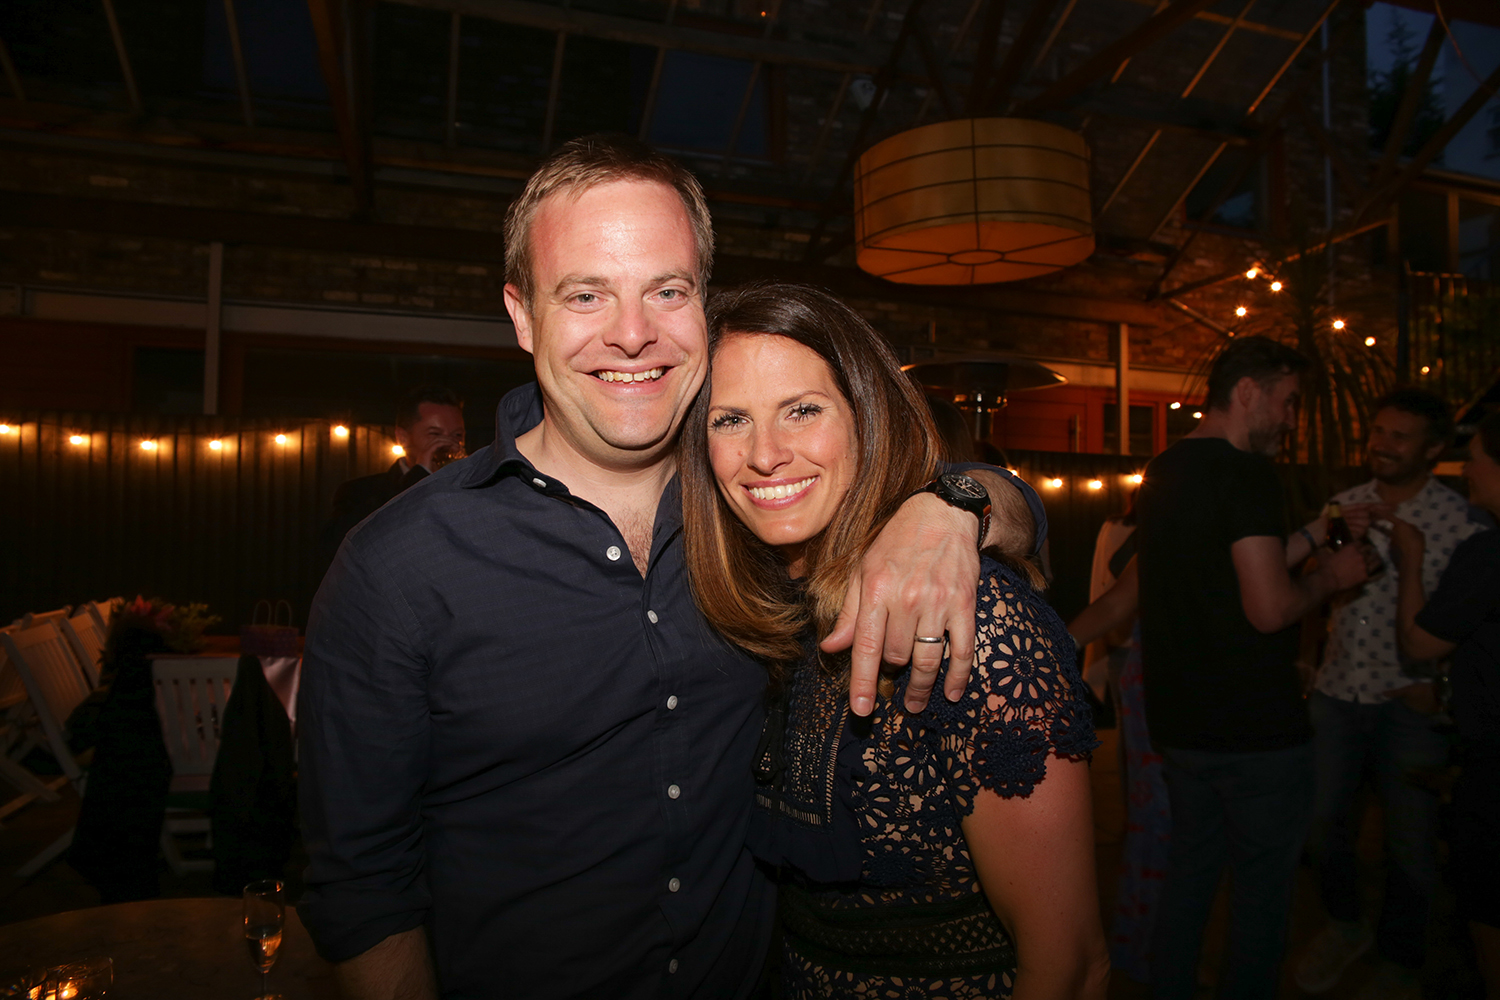 Man and woman smiling into camera at party